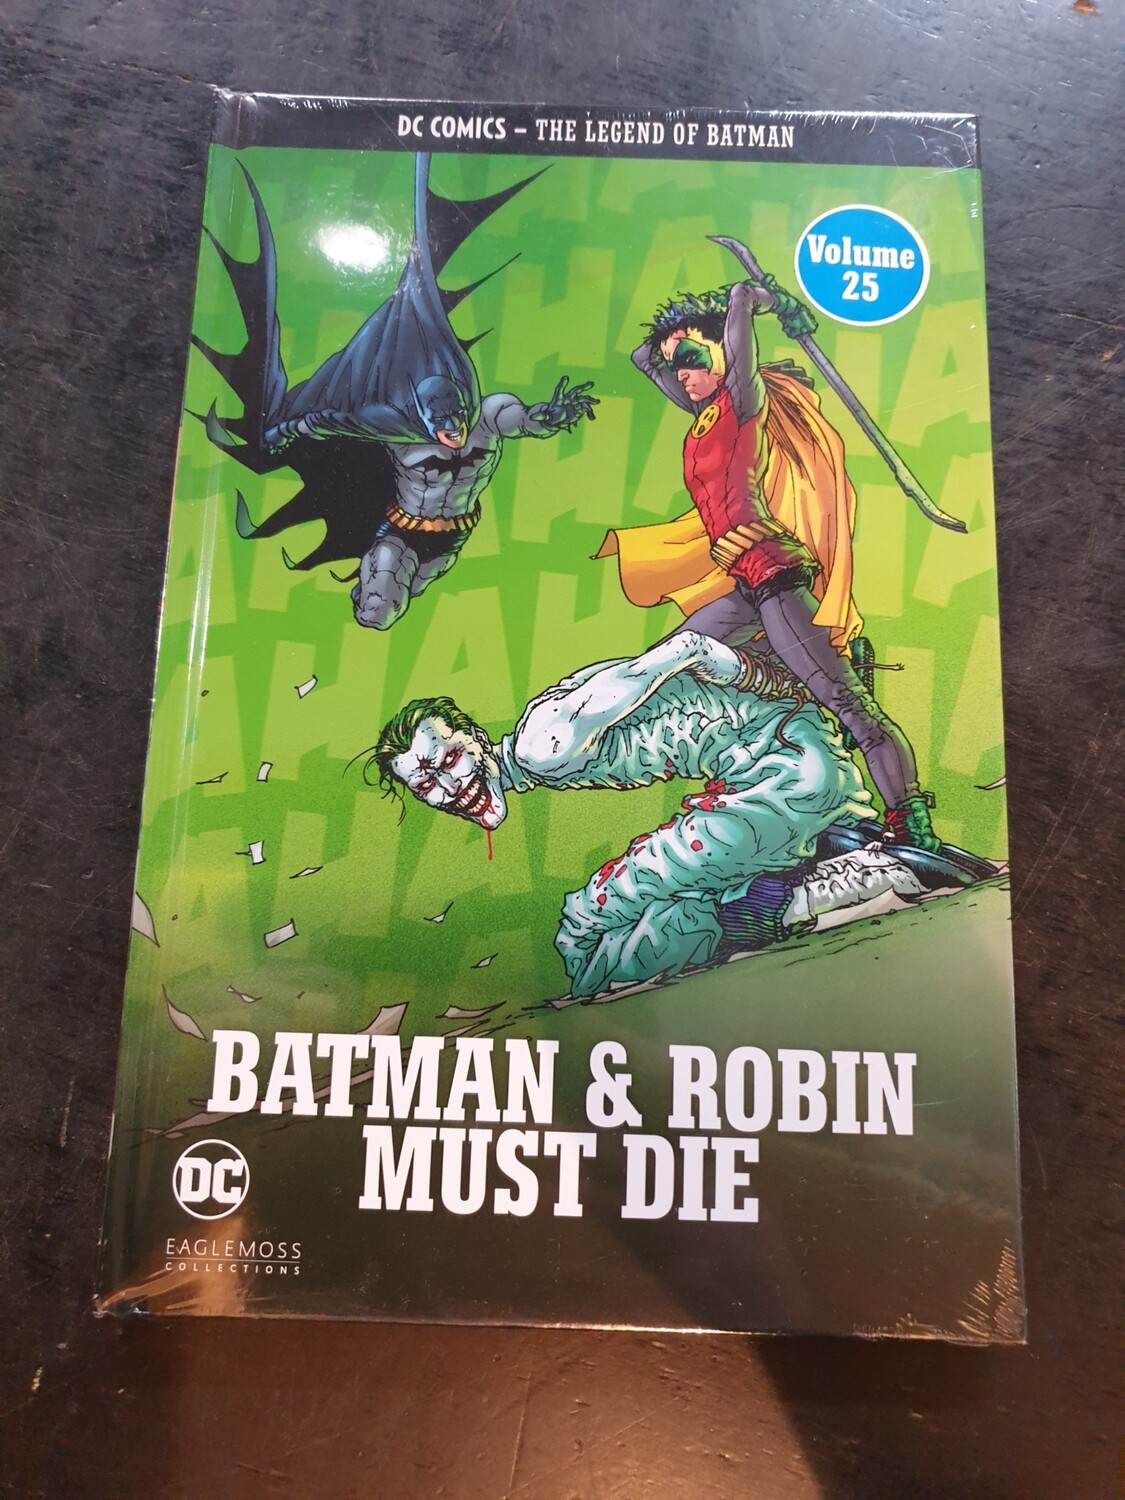 DC COMICS THE LEGEND OF BATMAN BATMAN AND ROBIN MUST DIE - Store - The  Funky Pickers Shed Vinyl, Garagenalia & Vintage Items